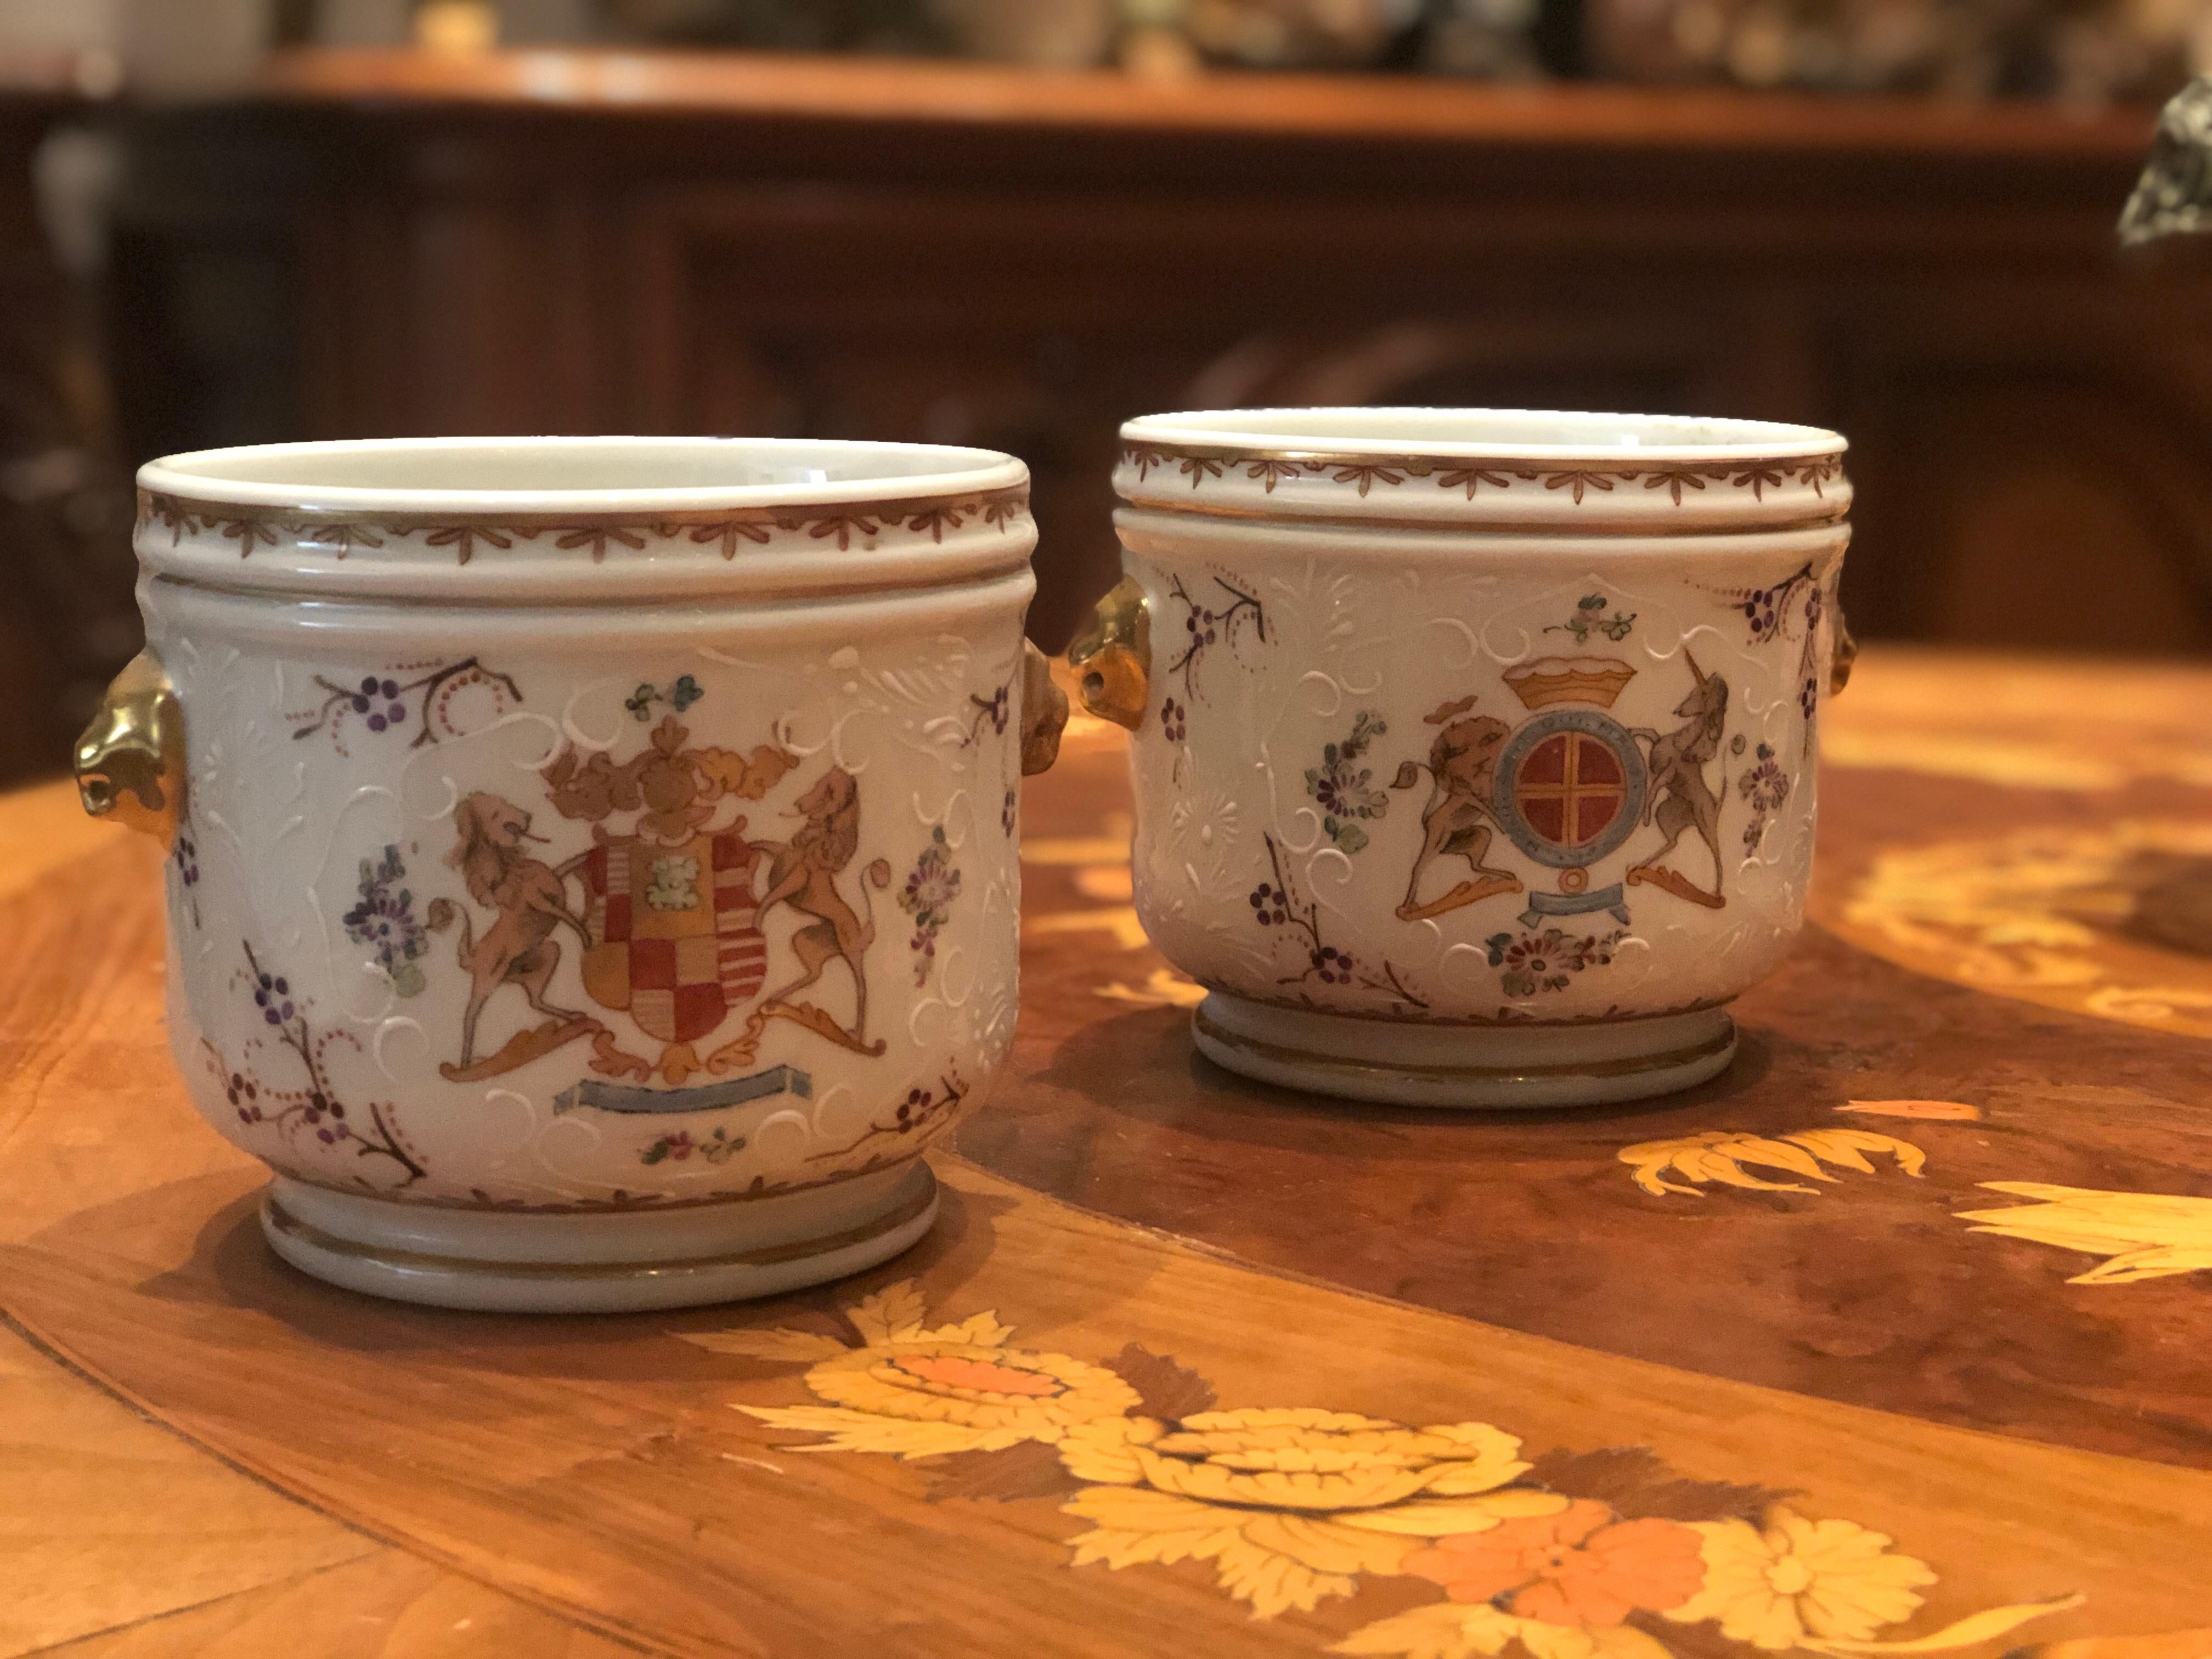 Samson (Paris):
Pair of small china refreshes with polychrome and gold decoration of a coat of arms and flower piers.
Chinese brand.
After 1900